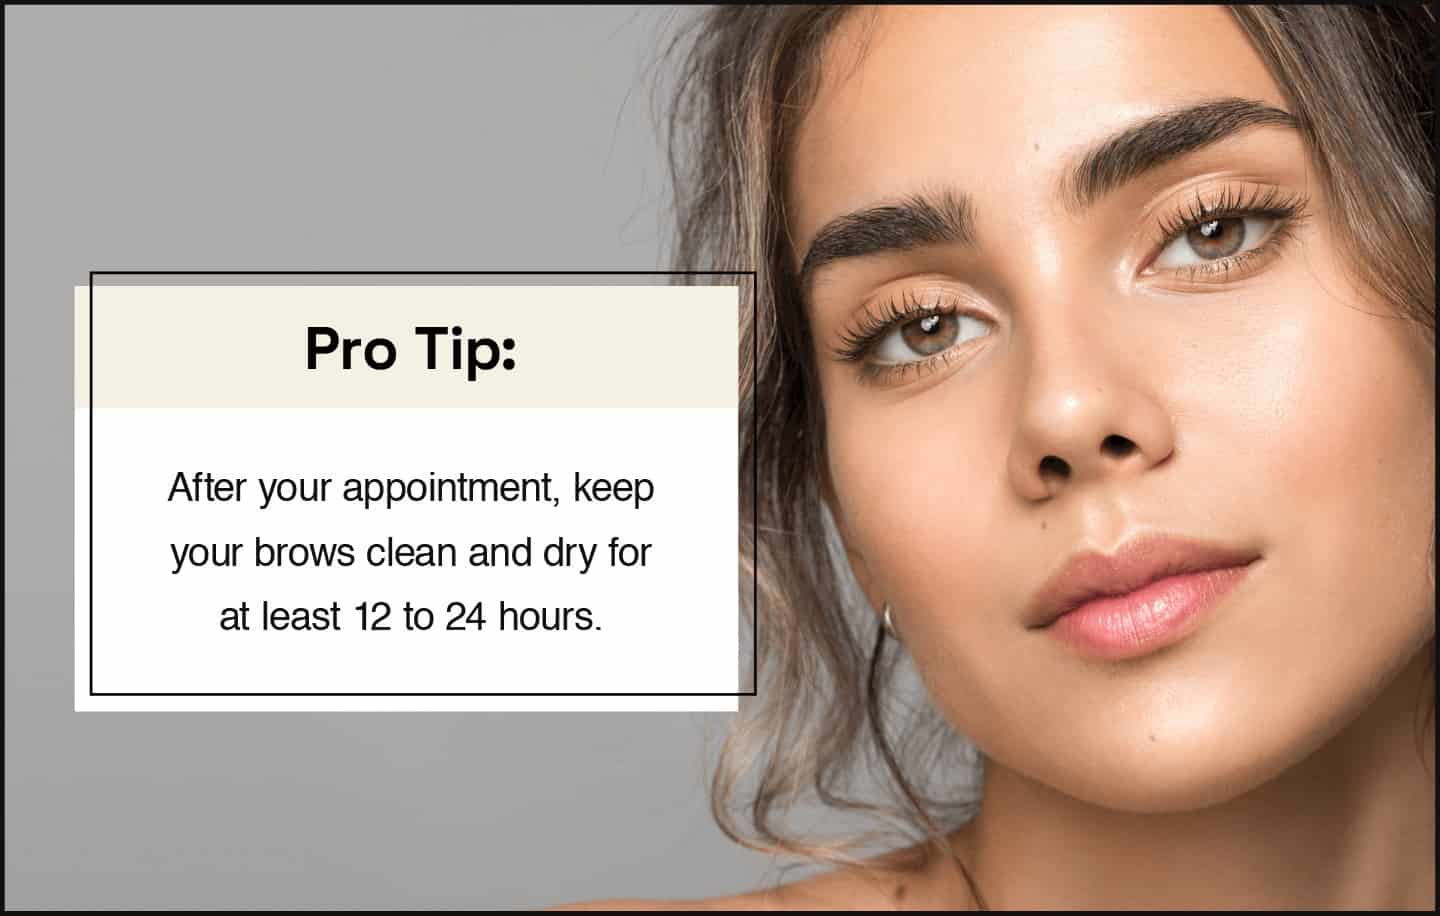 pro tip after your appointment, keep your brows clean and dry for at least 12 to 24 hours